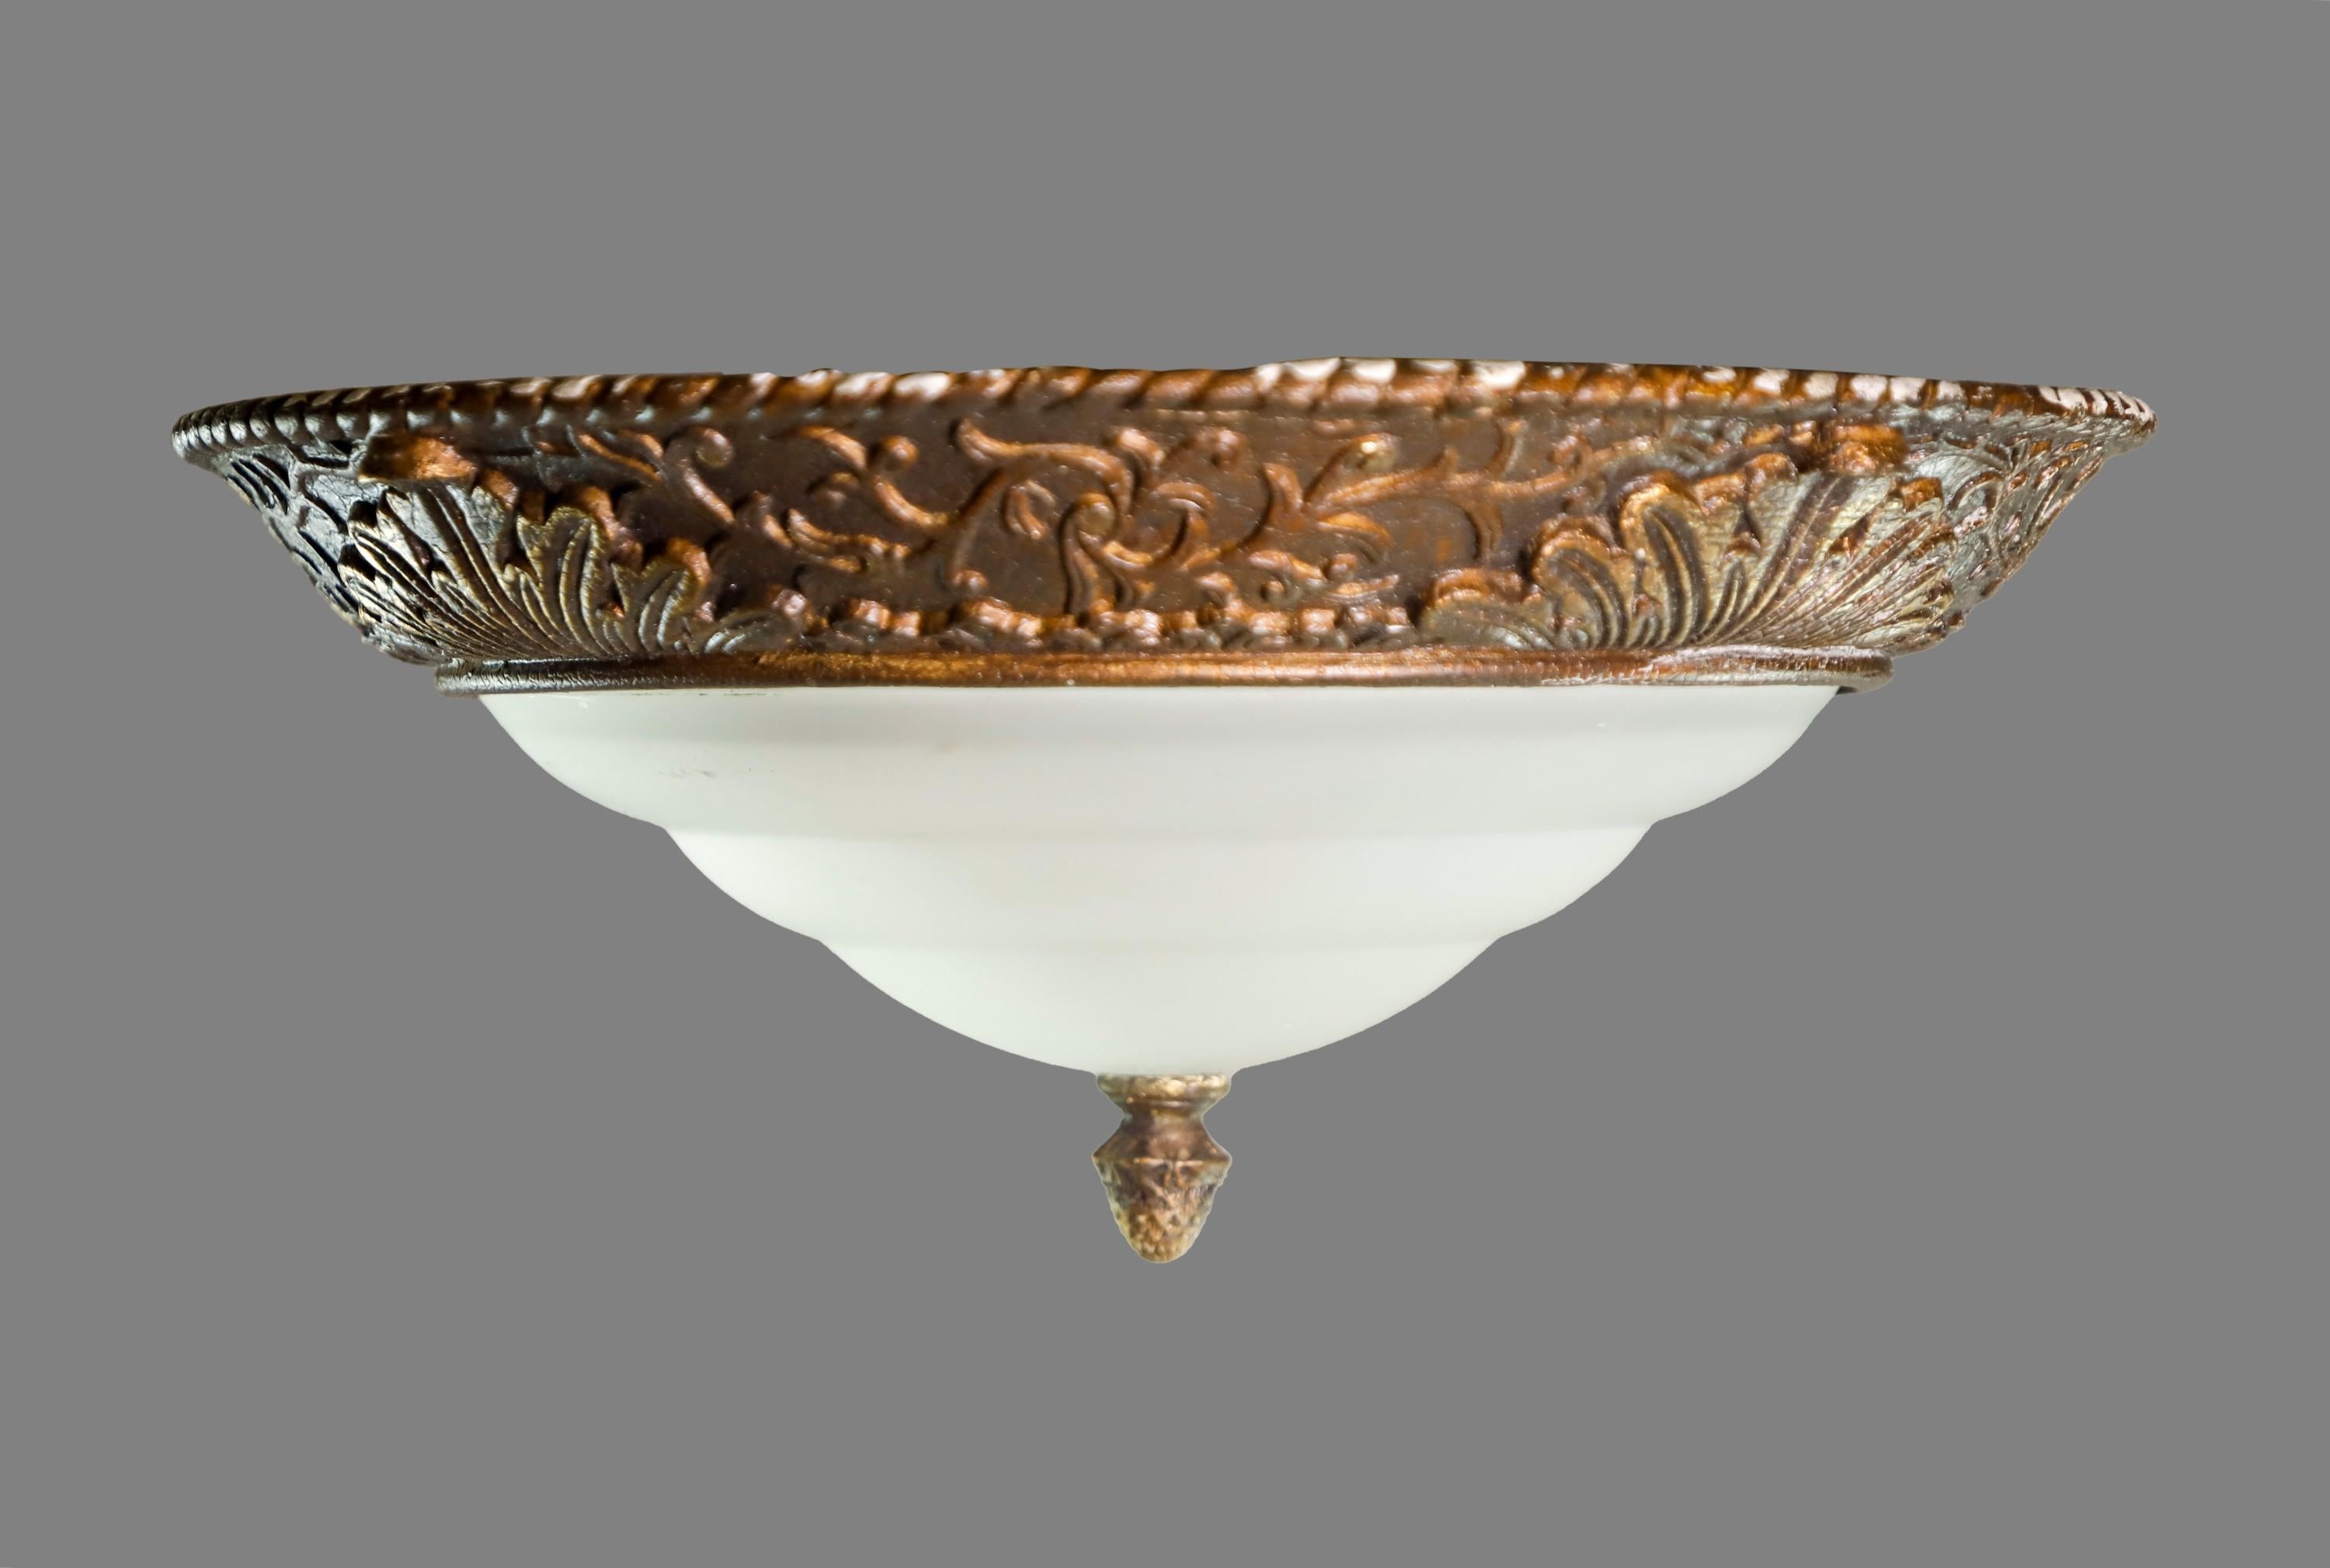 20th century Layered glass shade flush mount light with a floral design and acorn finial. Cleaned and restored. Please note, this item is located in our Scranton, PA location.